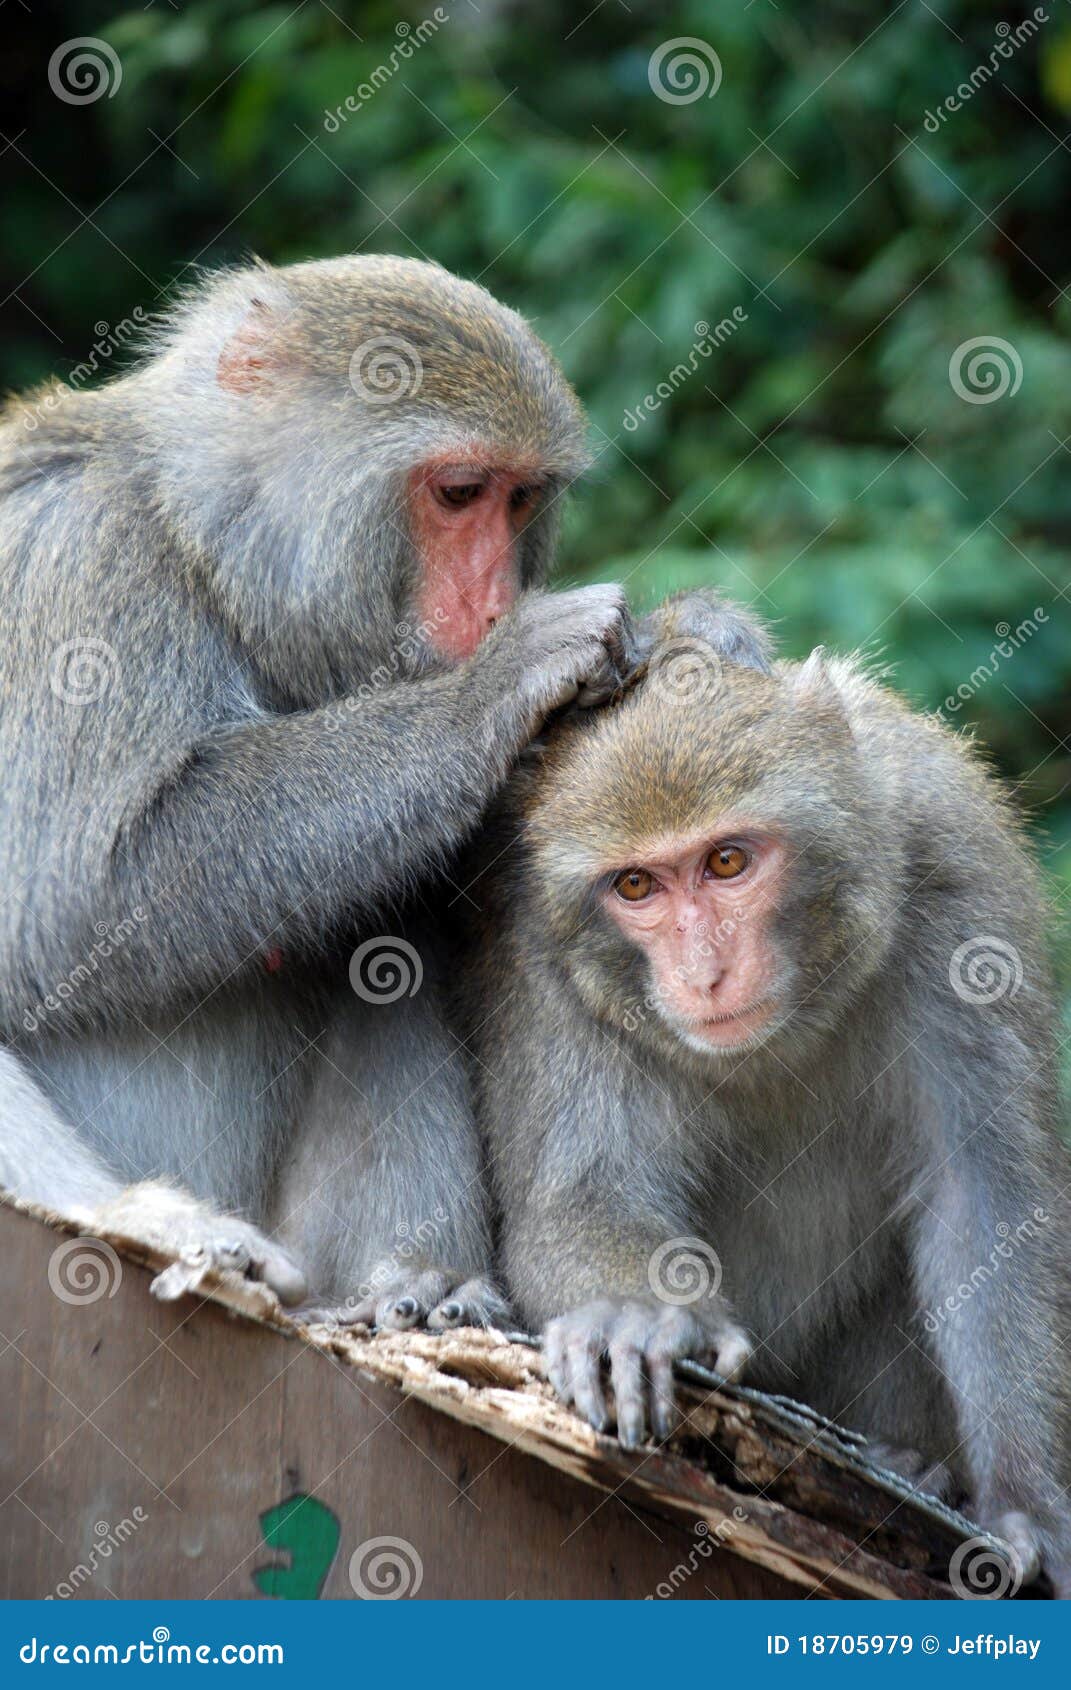 interaction of two monkeys grooming